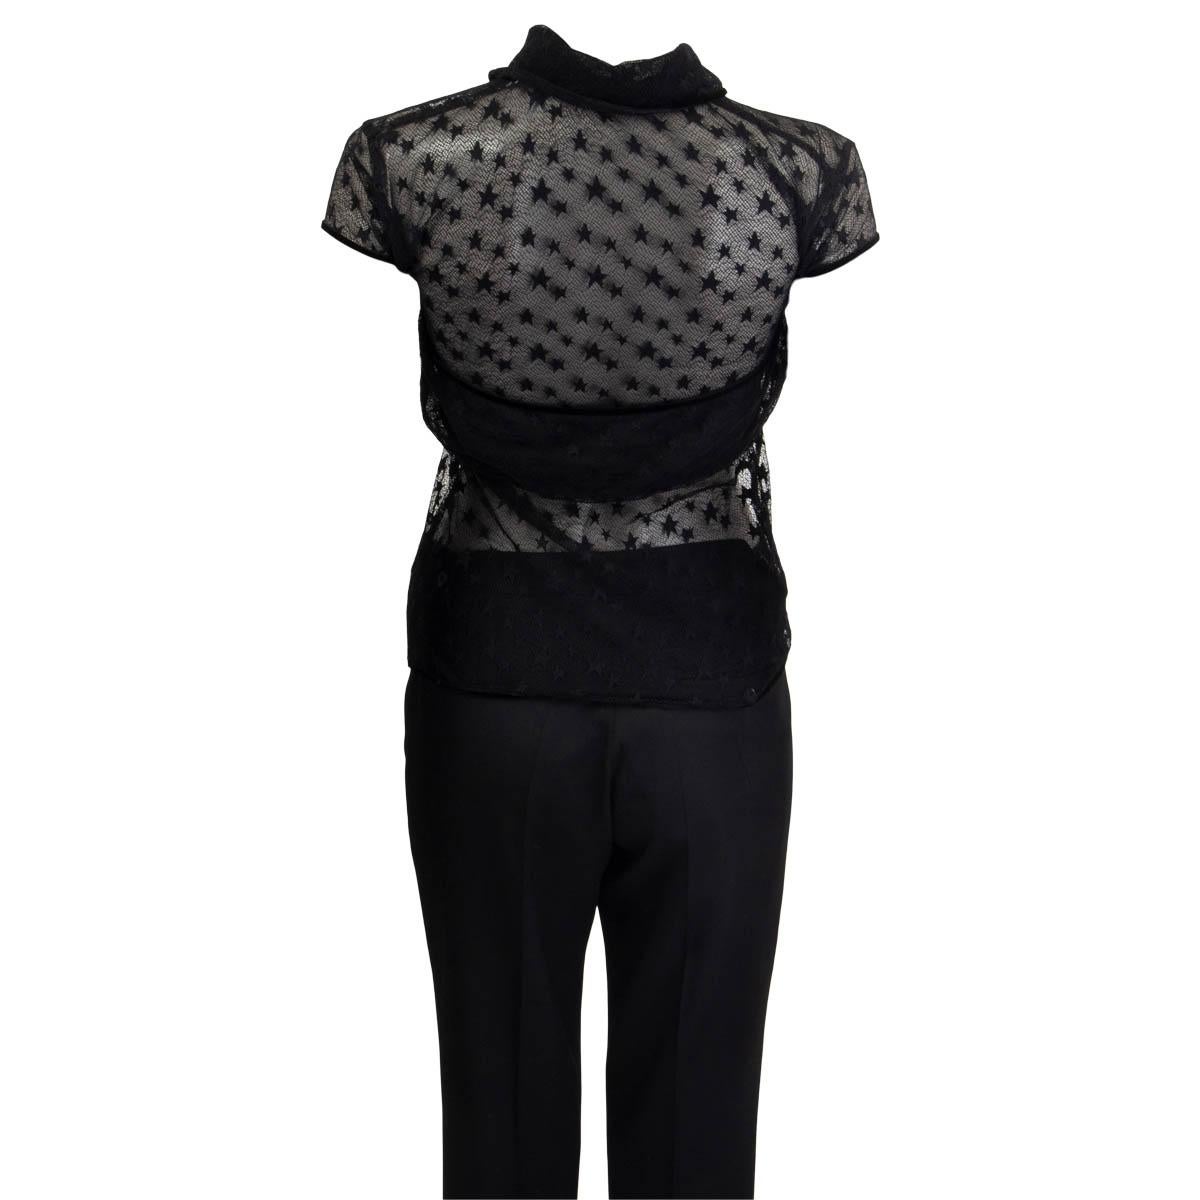 Black CHANEL black SHEER STAR LACE Cap Sleeve Blouse Shirt M For Sale